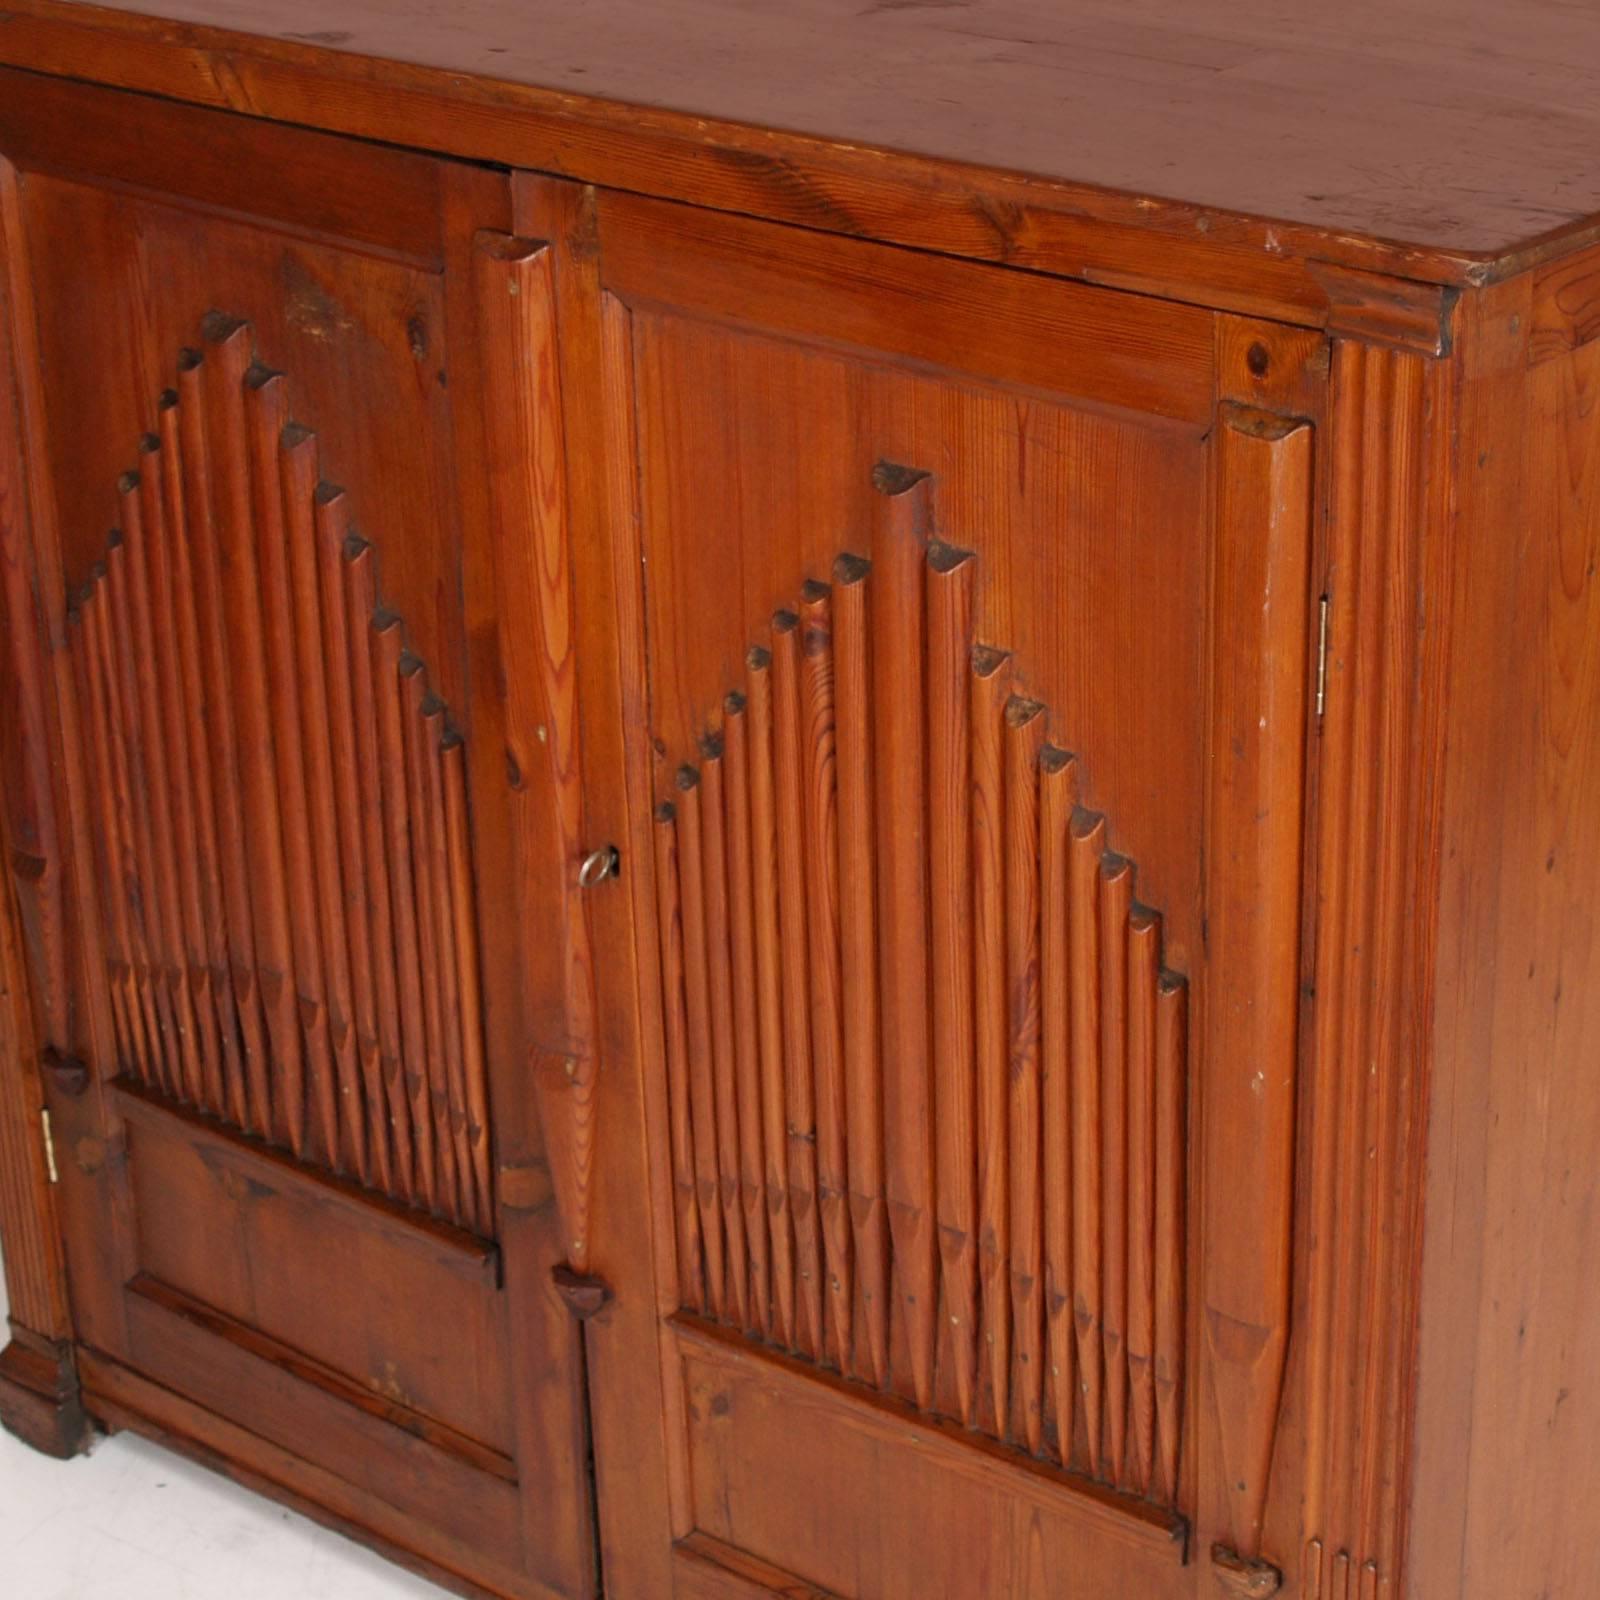 Baroque Early 19th Century Credenza Sideboard of Church, Larch, Restored Polished to Wax For Sale